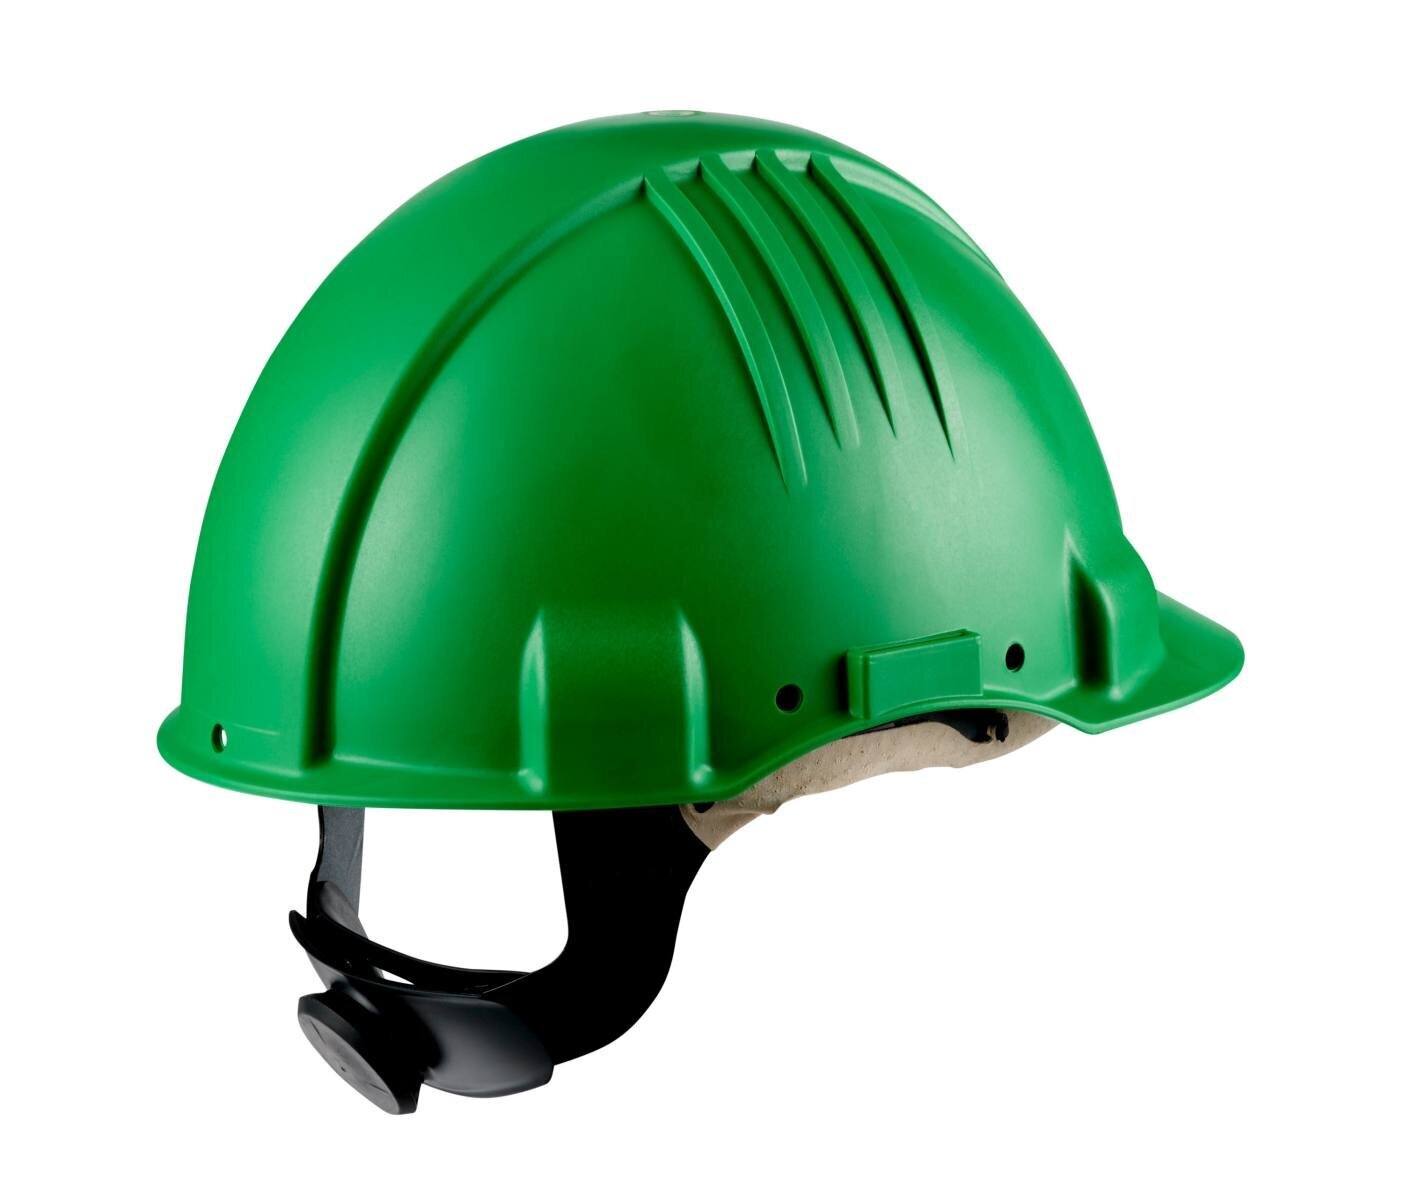 3M High-temperature safety helmet, ratchet fastening, non-ventilated, dielectric 1000 V, leather sweatband, green, G3501M-GP